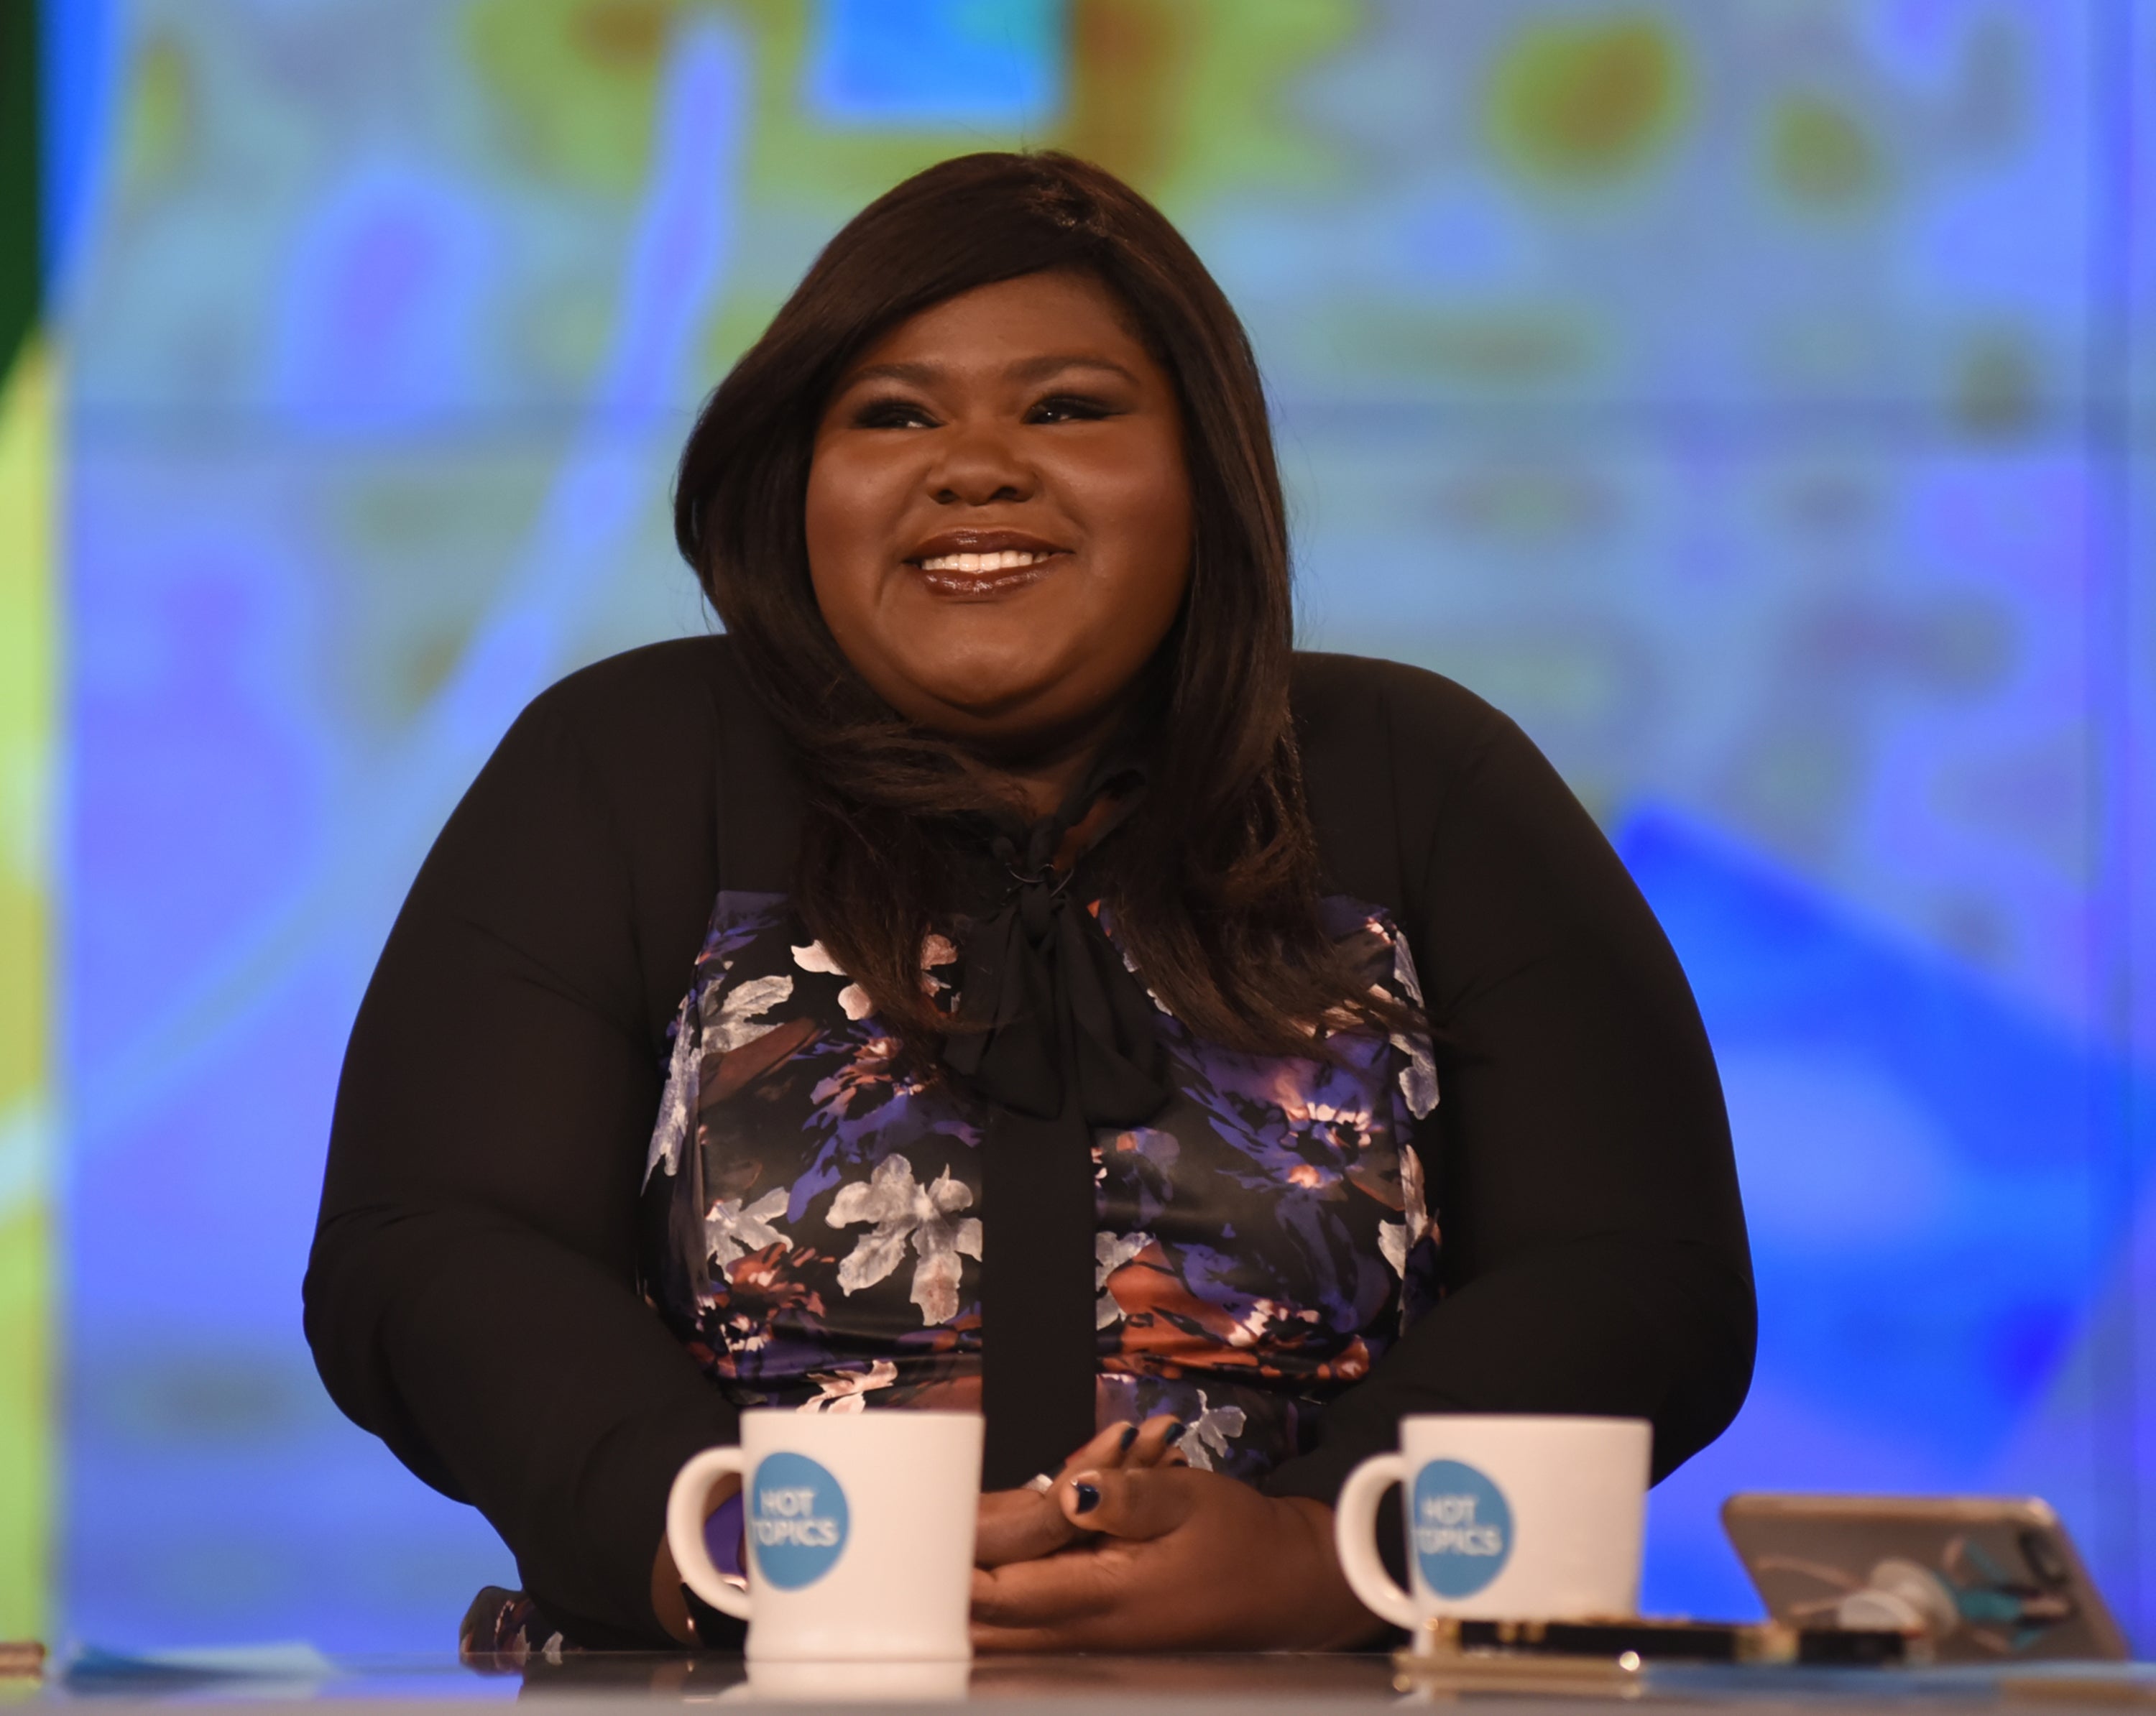 Gabourey Sidibe Talks About Her Directorial Debut And Being A Phone Sex Operator
